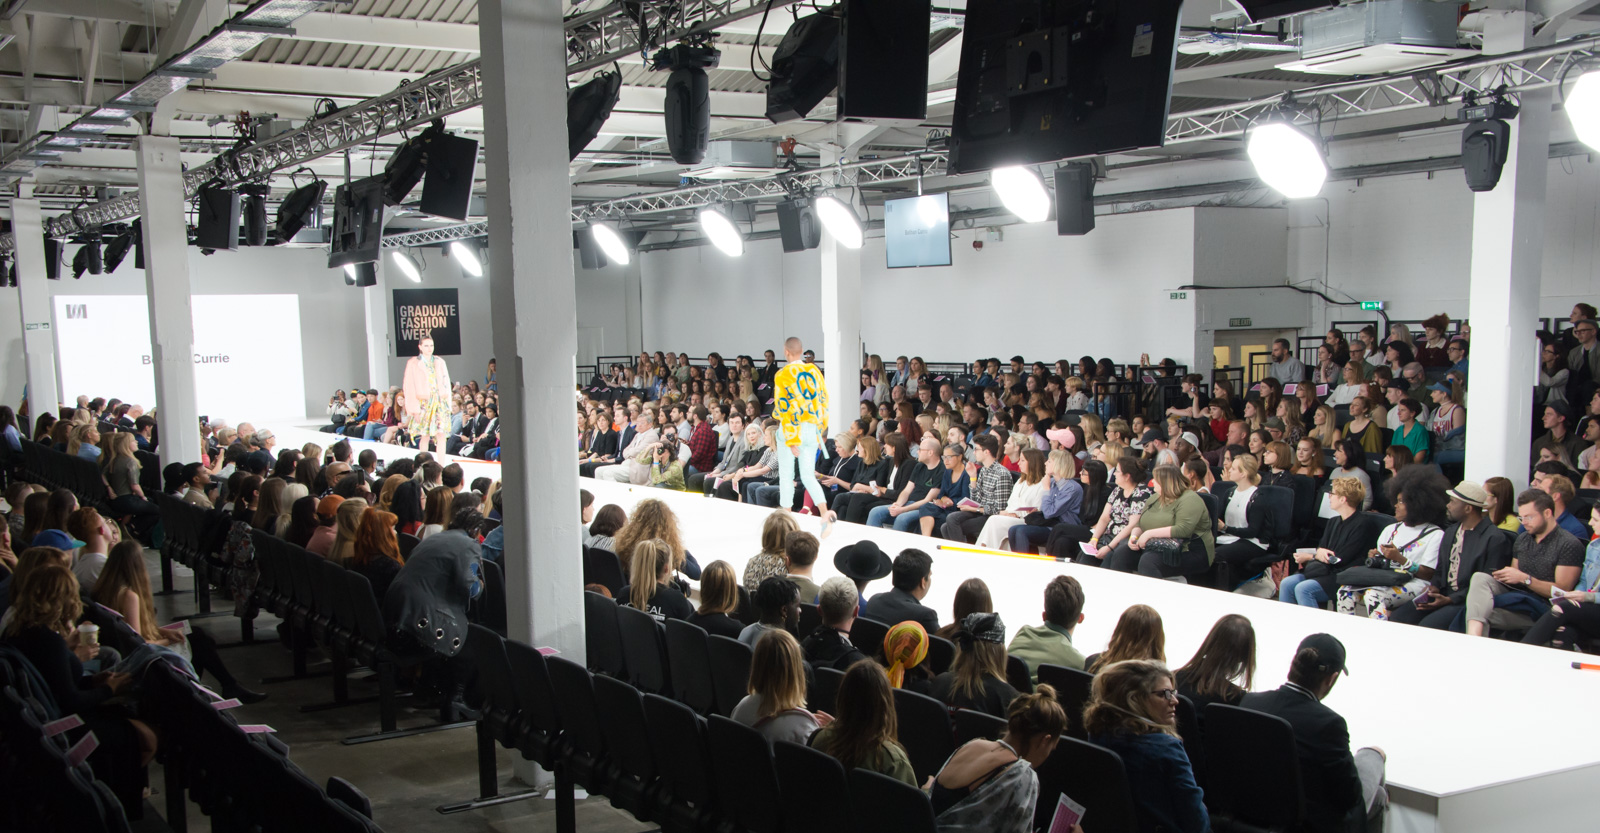 manchester crowd and catwalk 050617 3 image by tina mayr_.jpg